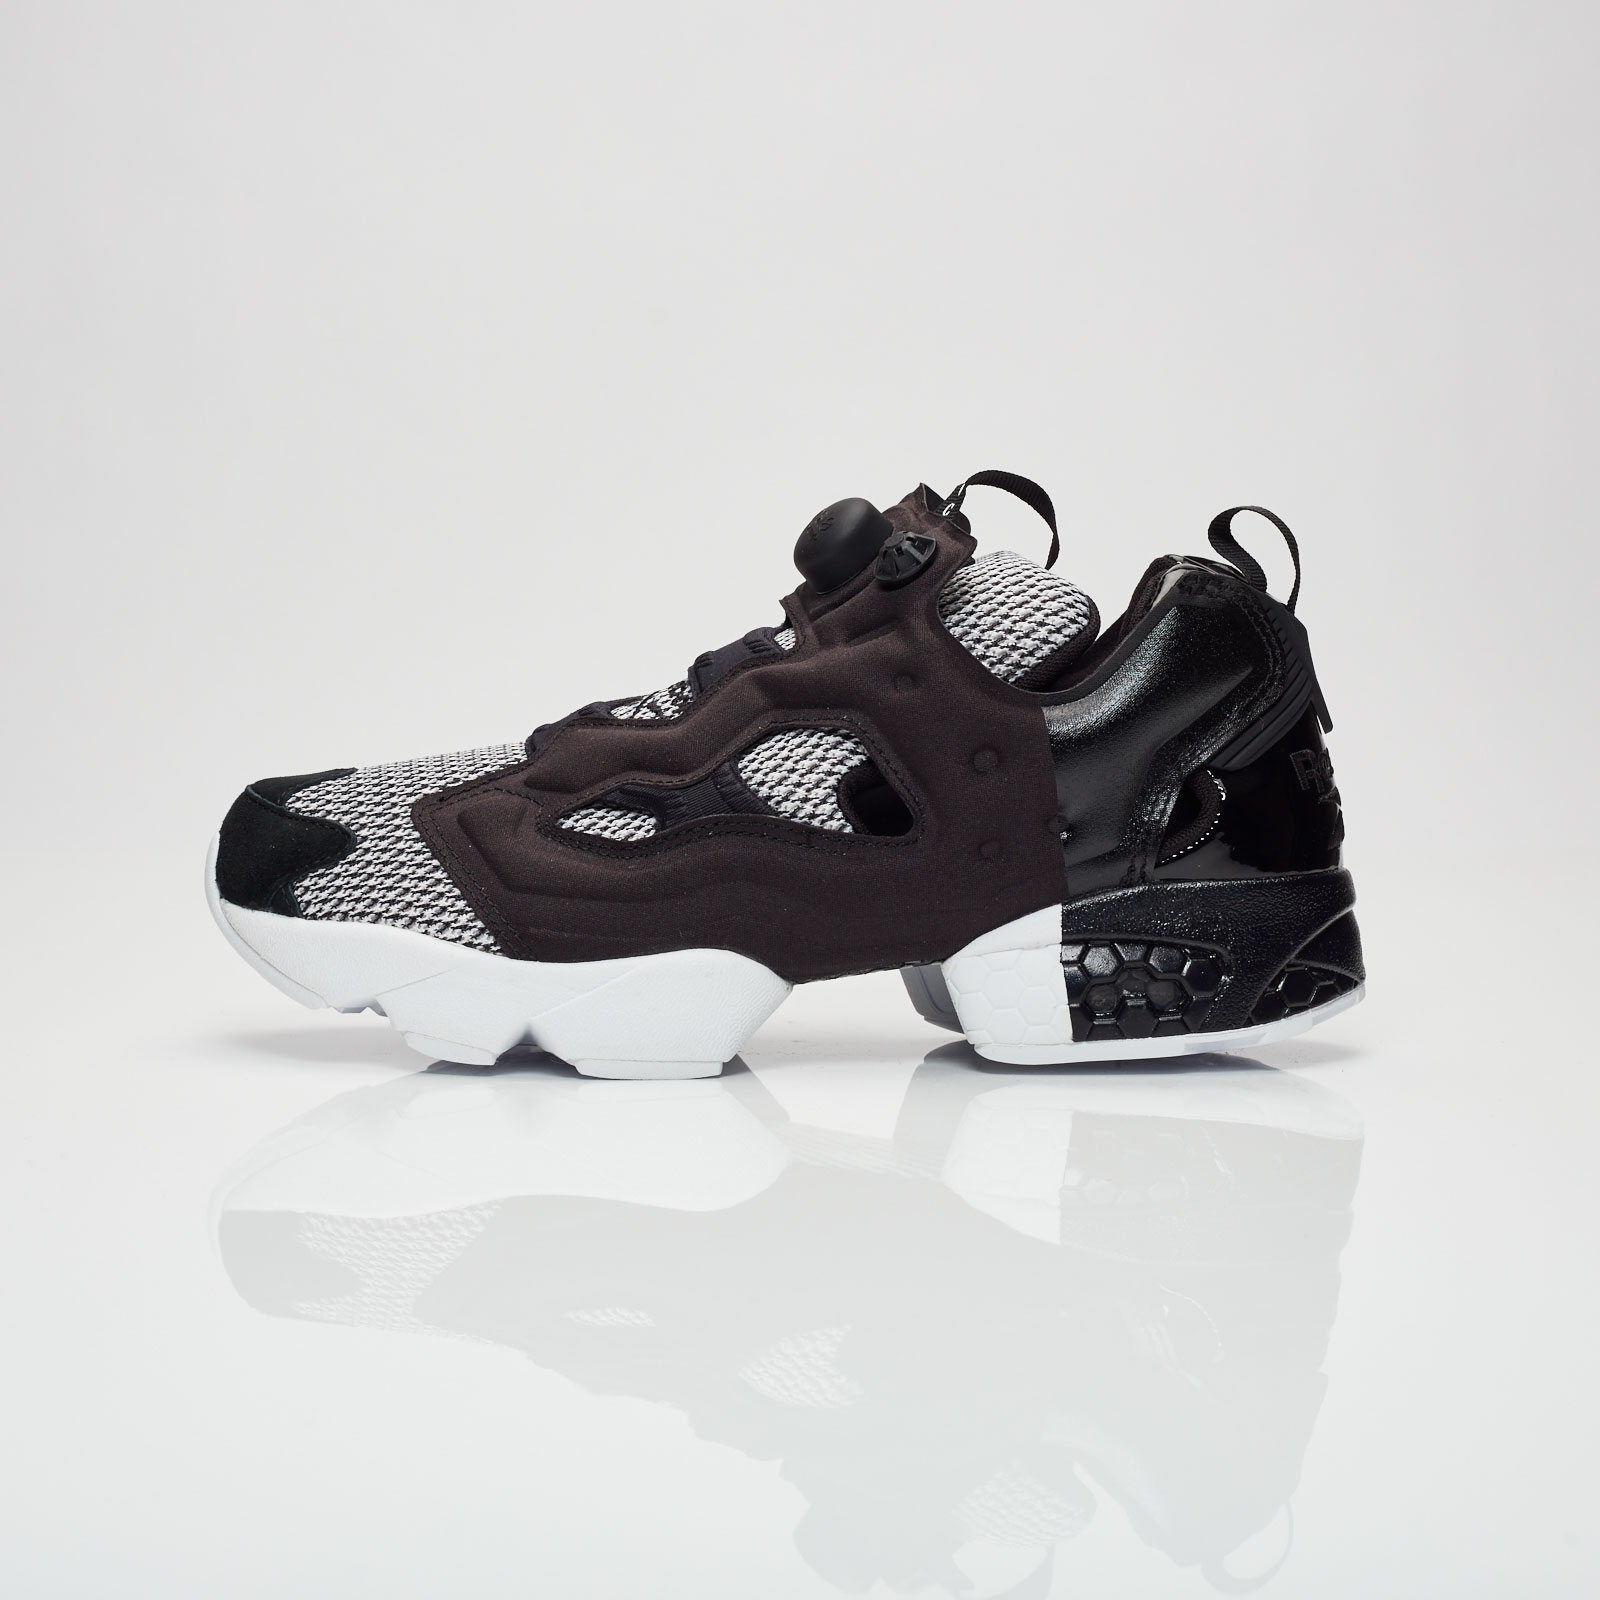 Black Scale and Reebok Launch an InstaPump Fury OG and Furylite ...